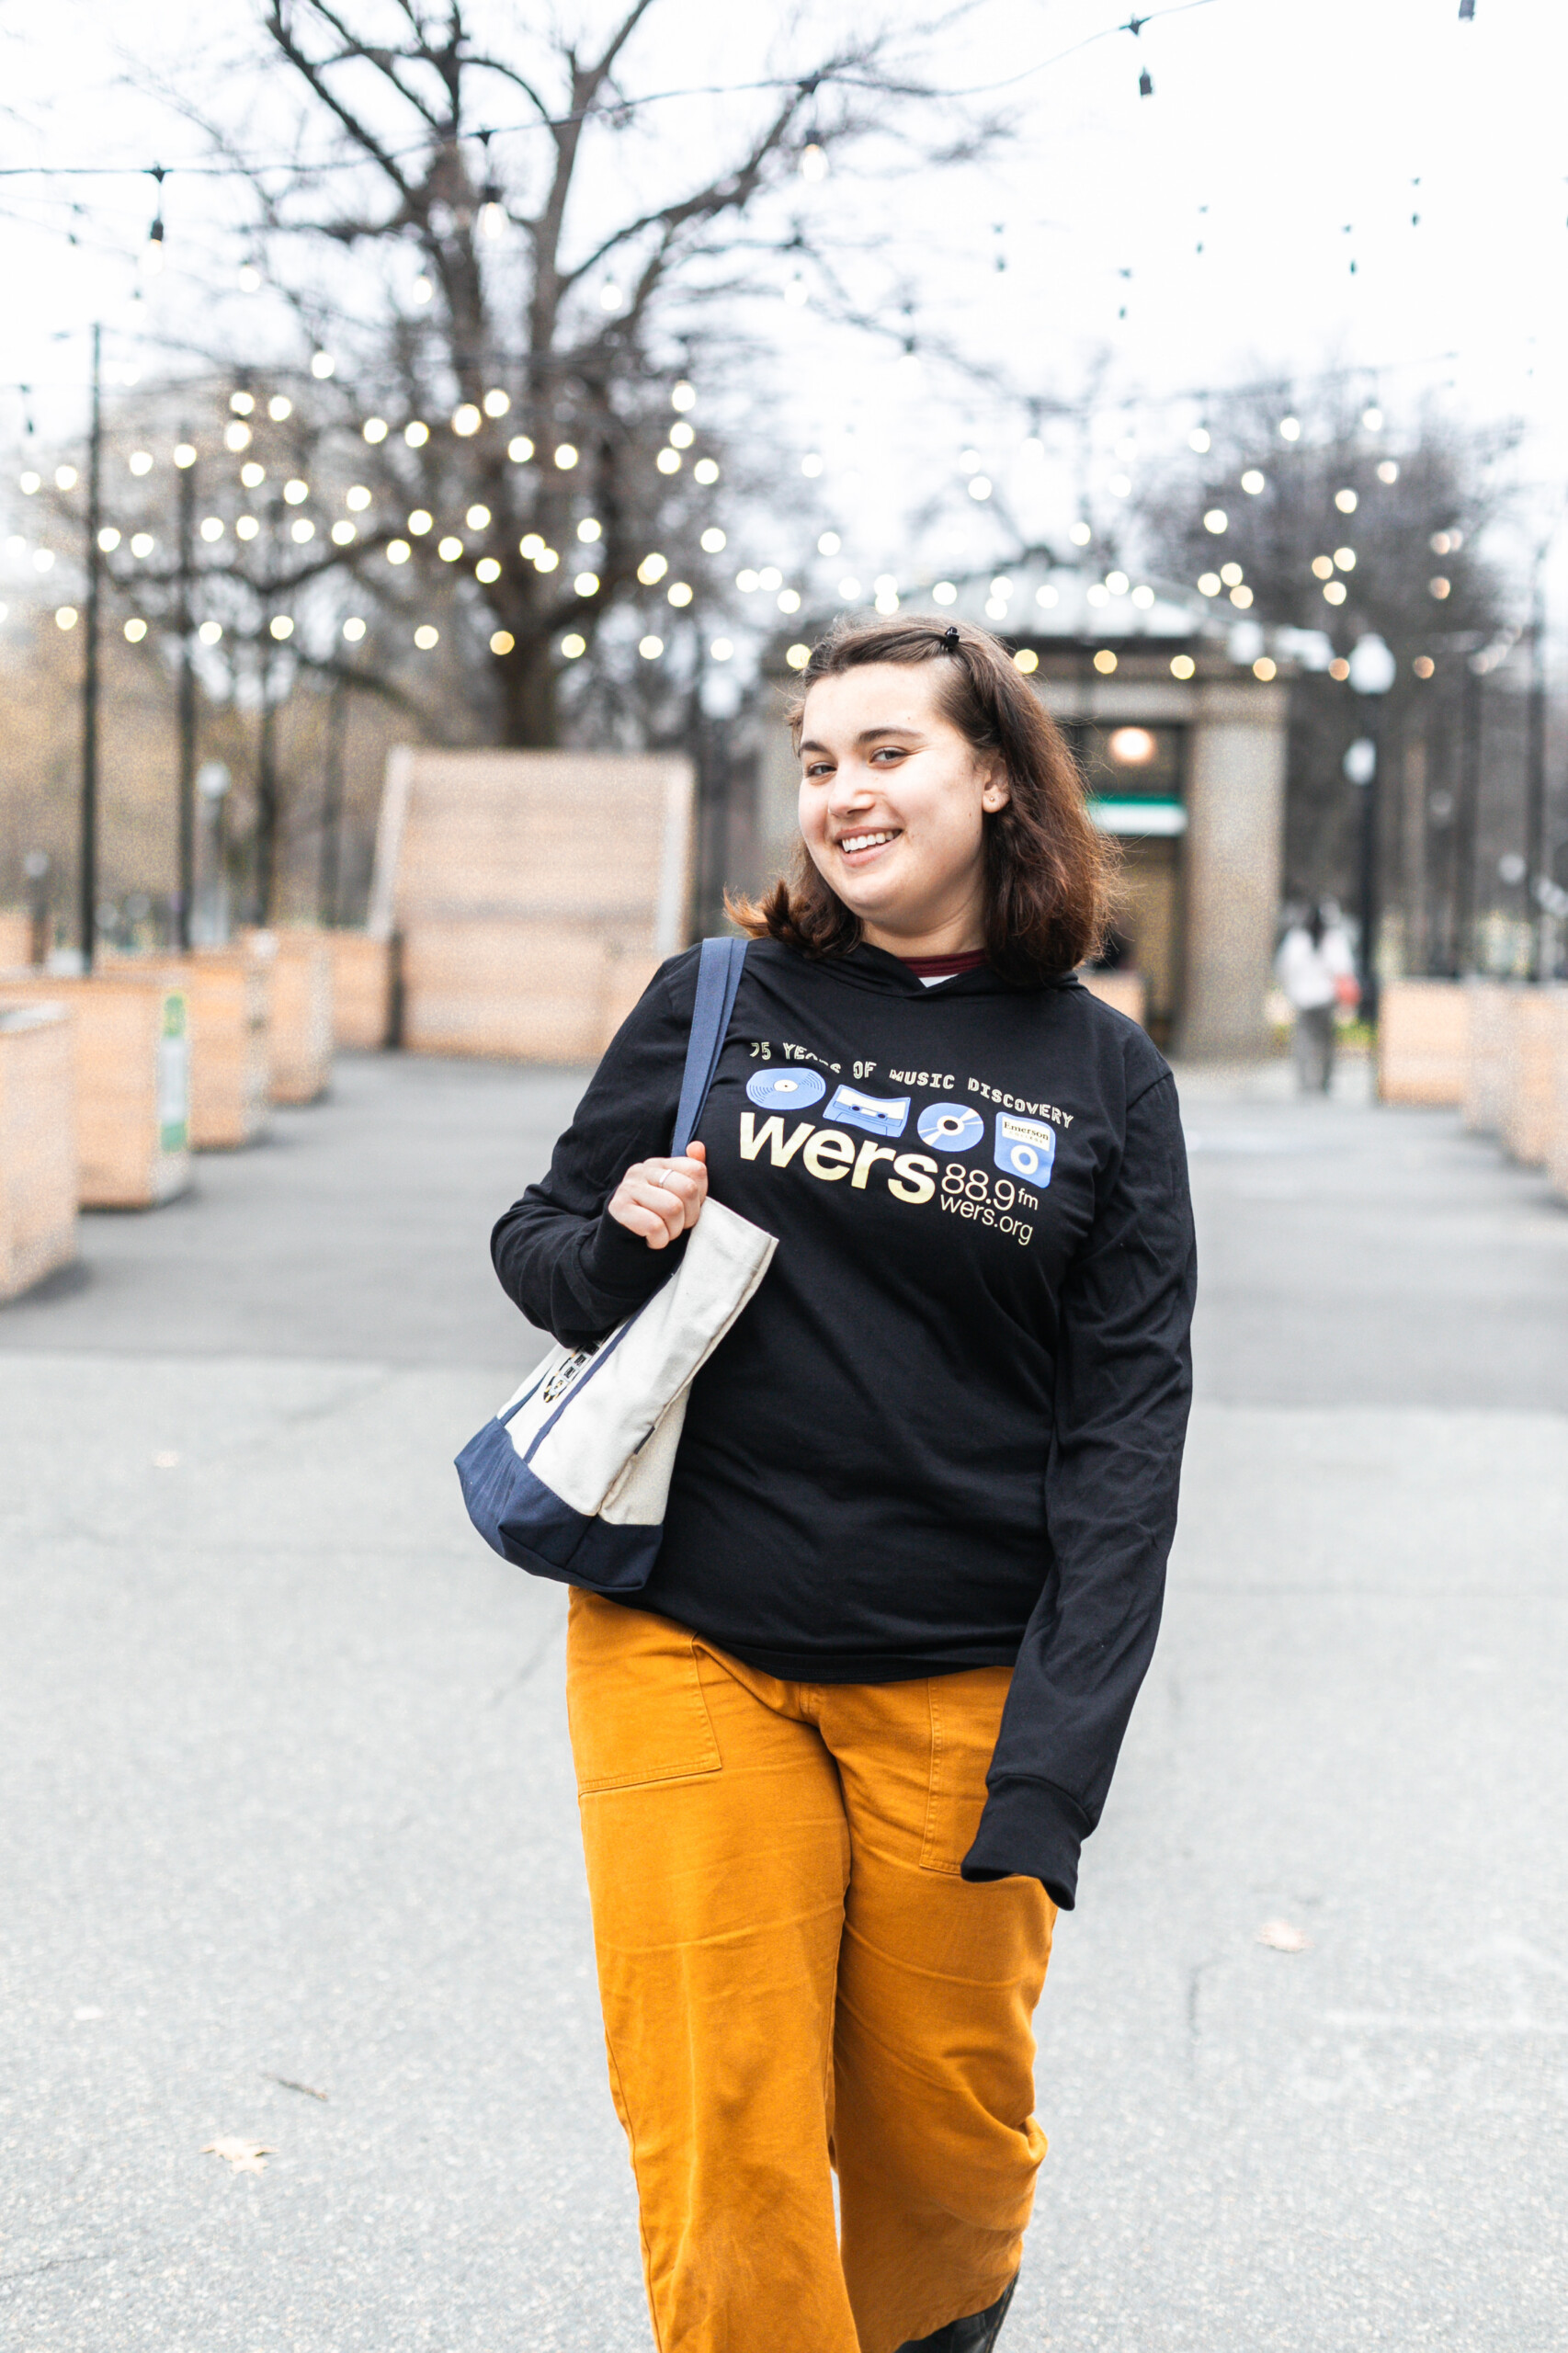 Photo of Emelia, host of Standing Room Only, wearing a black long-sleeved shirt with a "75 Years of Music Discovery, WERS 88.9" logo. She is also holding a cream tote with dark blue straps and an embroidered SRO logo in the center.